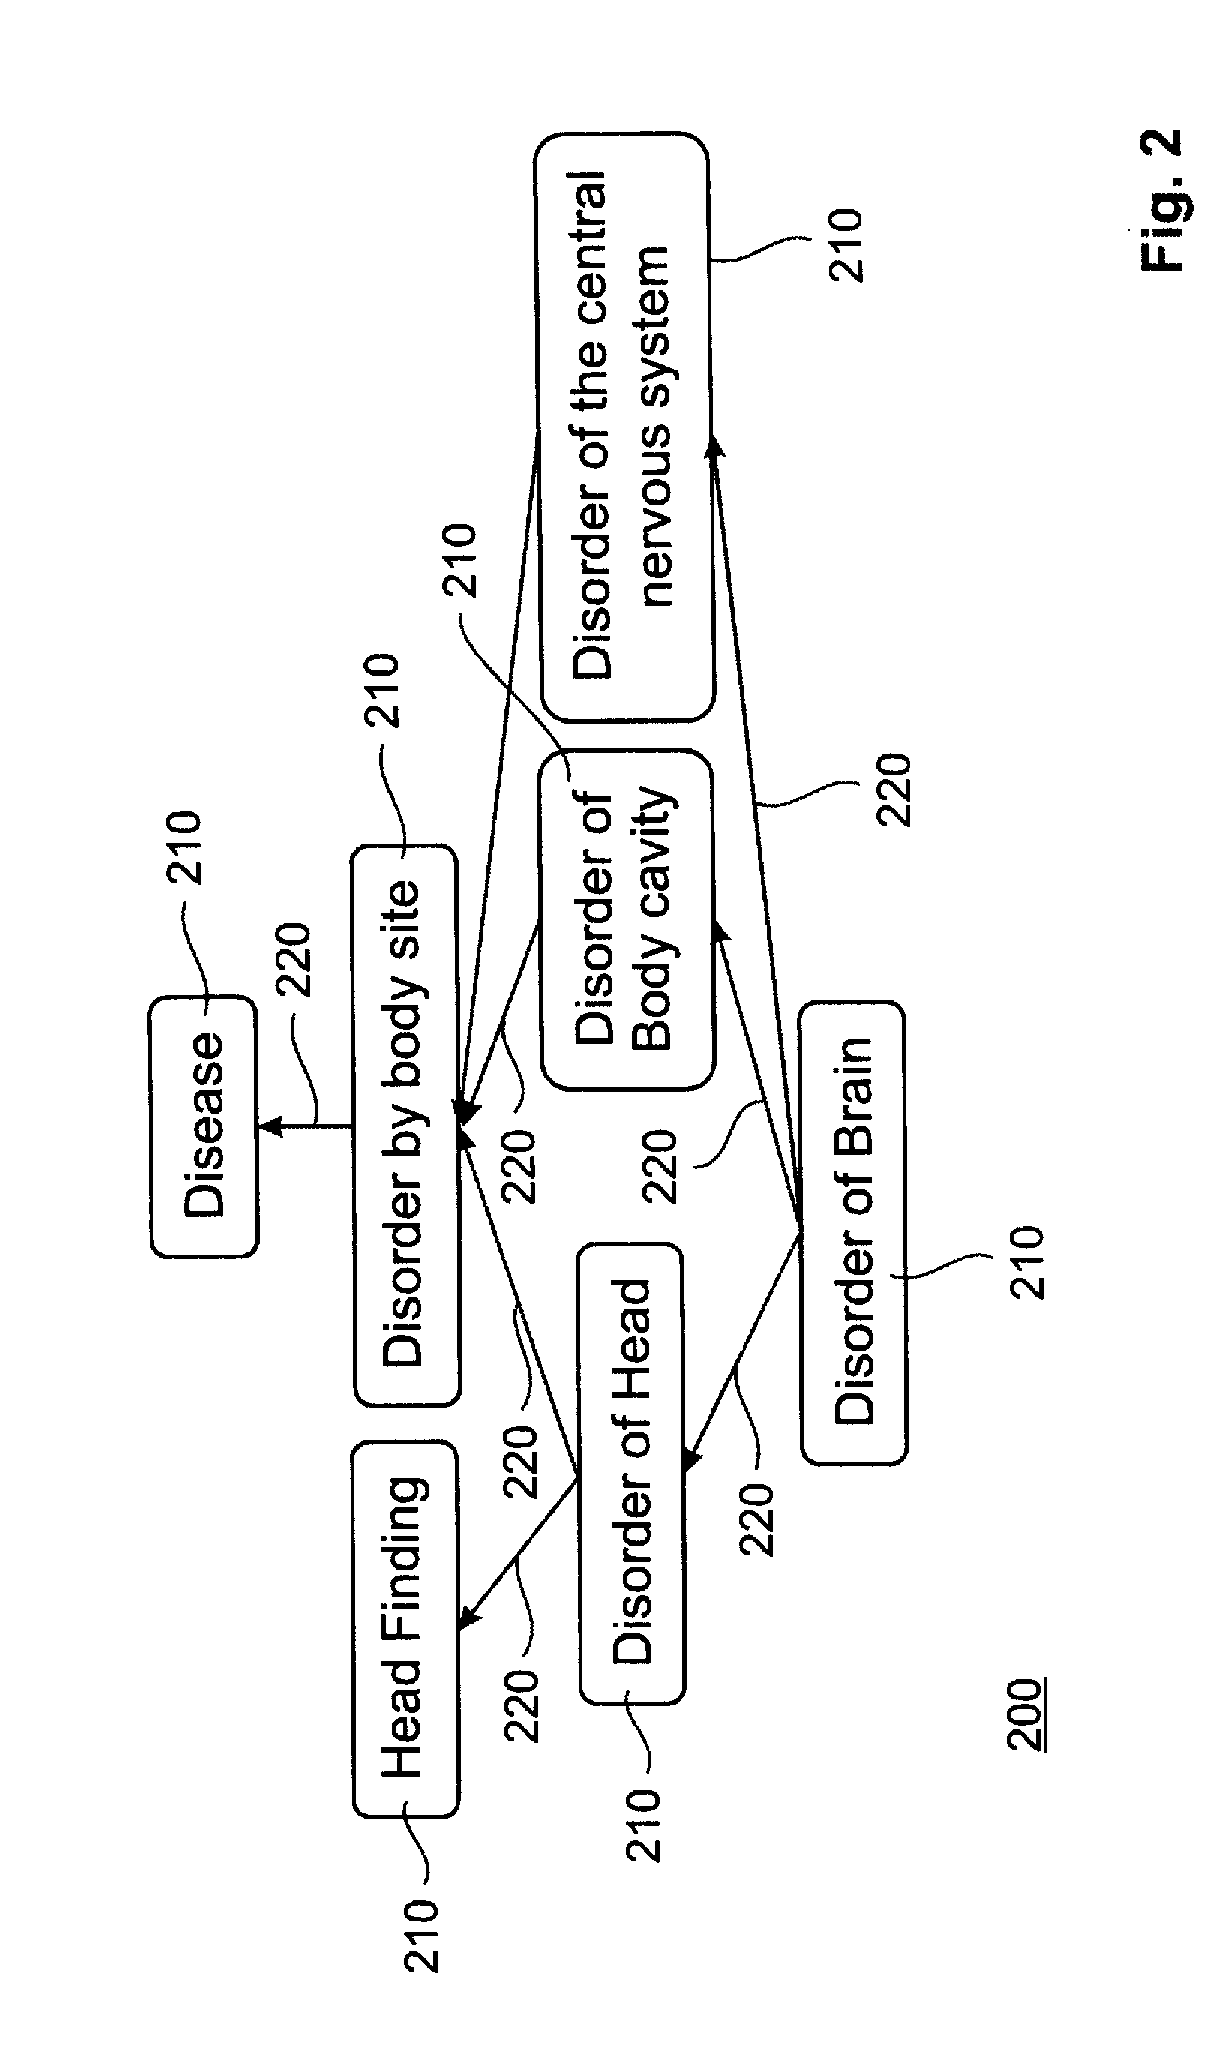 System and method for analyzing electronic data records